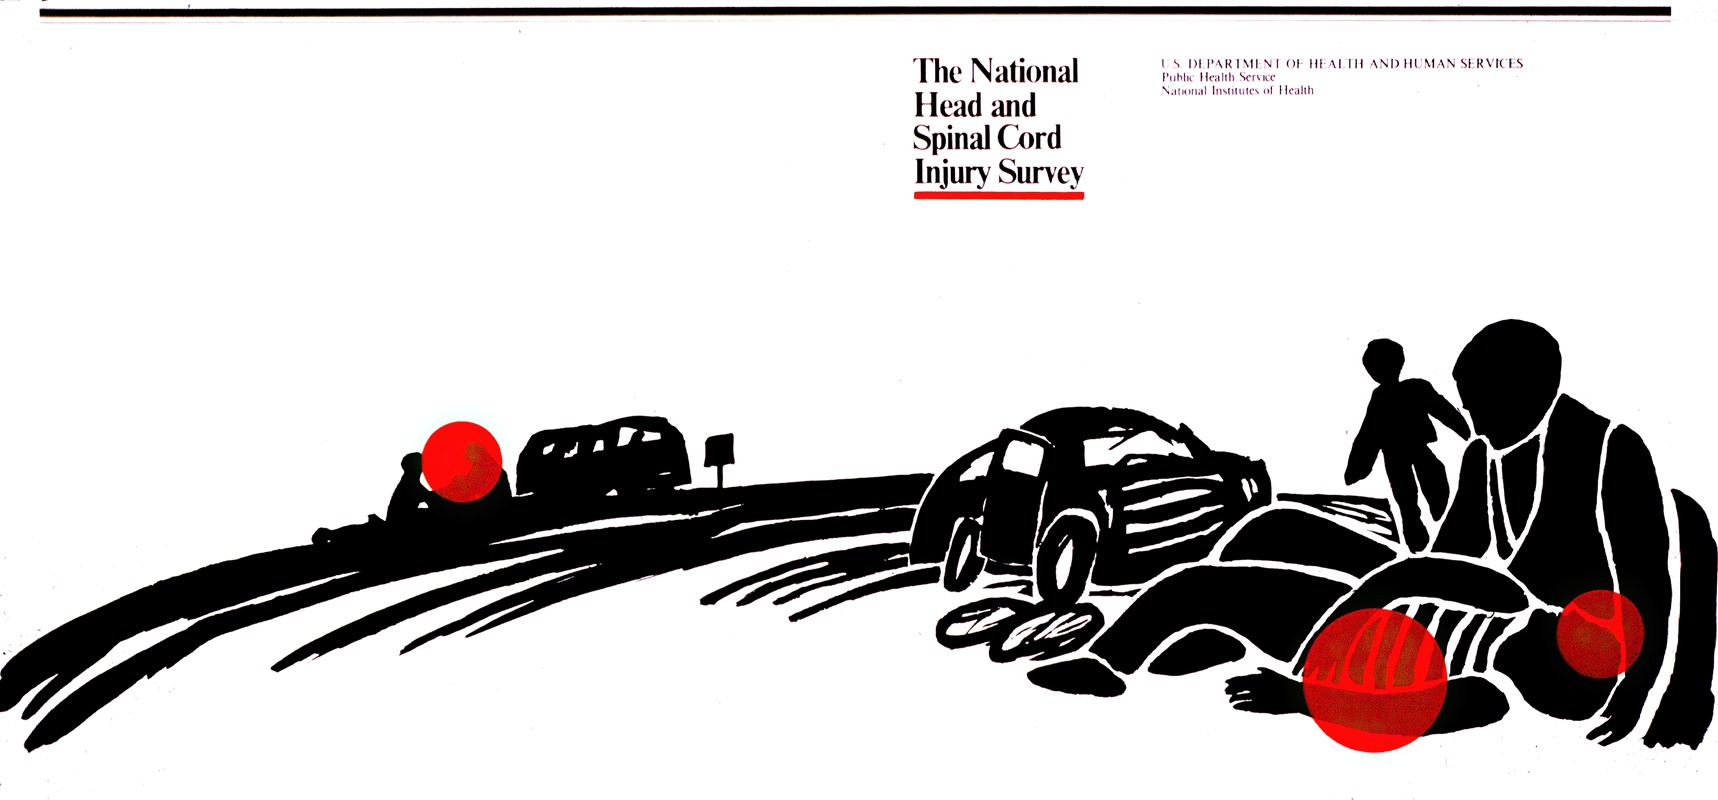 National Institutes of Health - The National Head and Spinal Cord Injury Survey